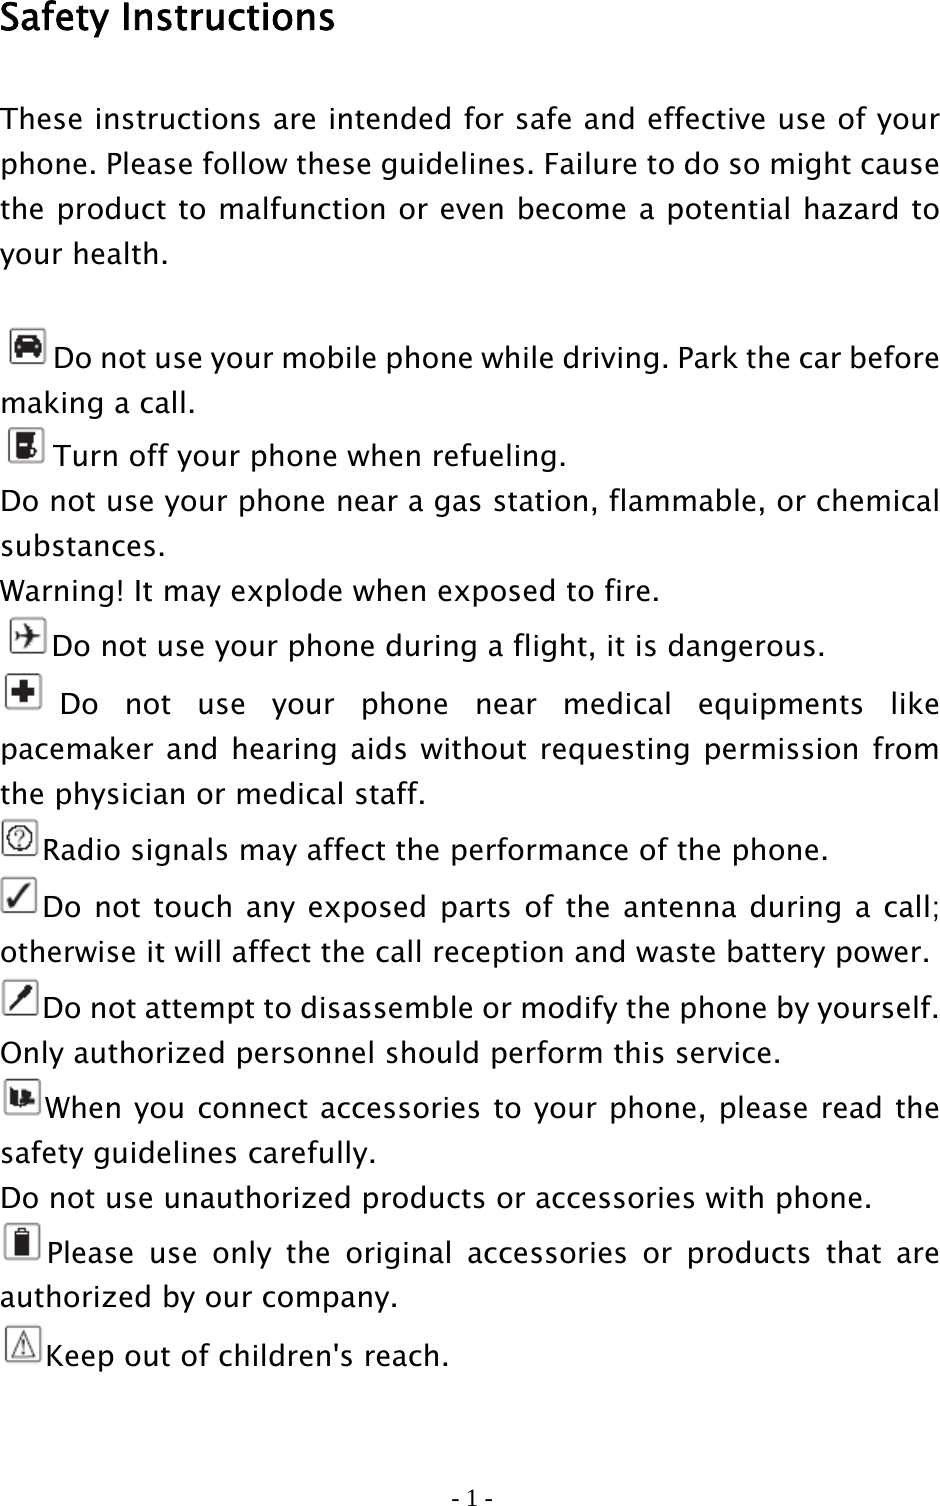 - 1 - Safety Instructions These instructions are intended for safe and effective use of your phone. Please follow these guidelines. Failure to do so might cause the product to malfunction or even become a potential hazard to your health.  Do not use your mobile phone while driving. Park the car before     making a call. Turn off your phone when refueling. Do not use your phone near a gas station, flammable, or chemical substances.  Warning! It may explode when exposed to fire. Do not use your phone during a flight, it is dangerous. Do not use your phone near medical equipments like pacemaker and hearing aids without requesting permission from the physician or medical staff. Radio signals may affect the performance of the phone. Do not touch any exposed parts of the antenna during a call; otherwise it will affect the call reception and waste battery power. Do not attempt to disassemble or modify the phone by yourself. Only authorized personnel should perform this service. When you connect accessories to your phone, please read the safety guidelines carefully. Do not use unauthorized products or accessories with phone. Please use only the original accessories or products that are authorized by our company. Keep out of children&apos;s reach.  